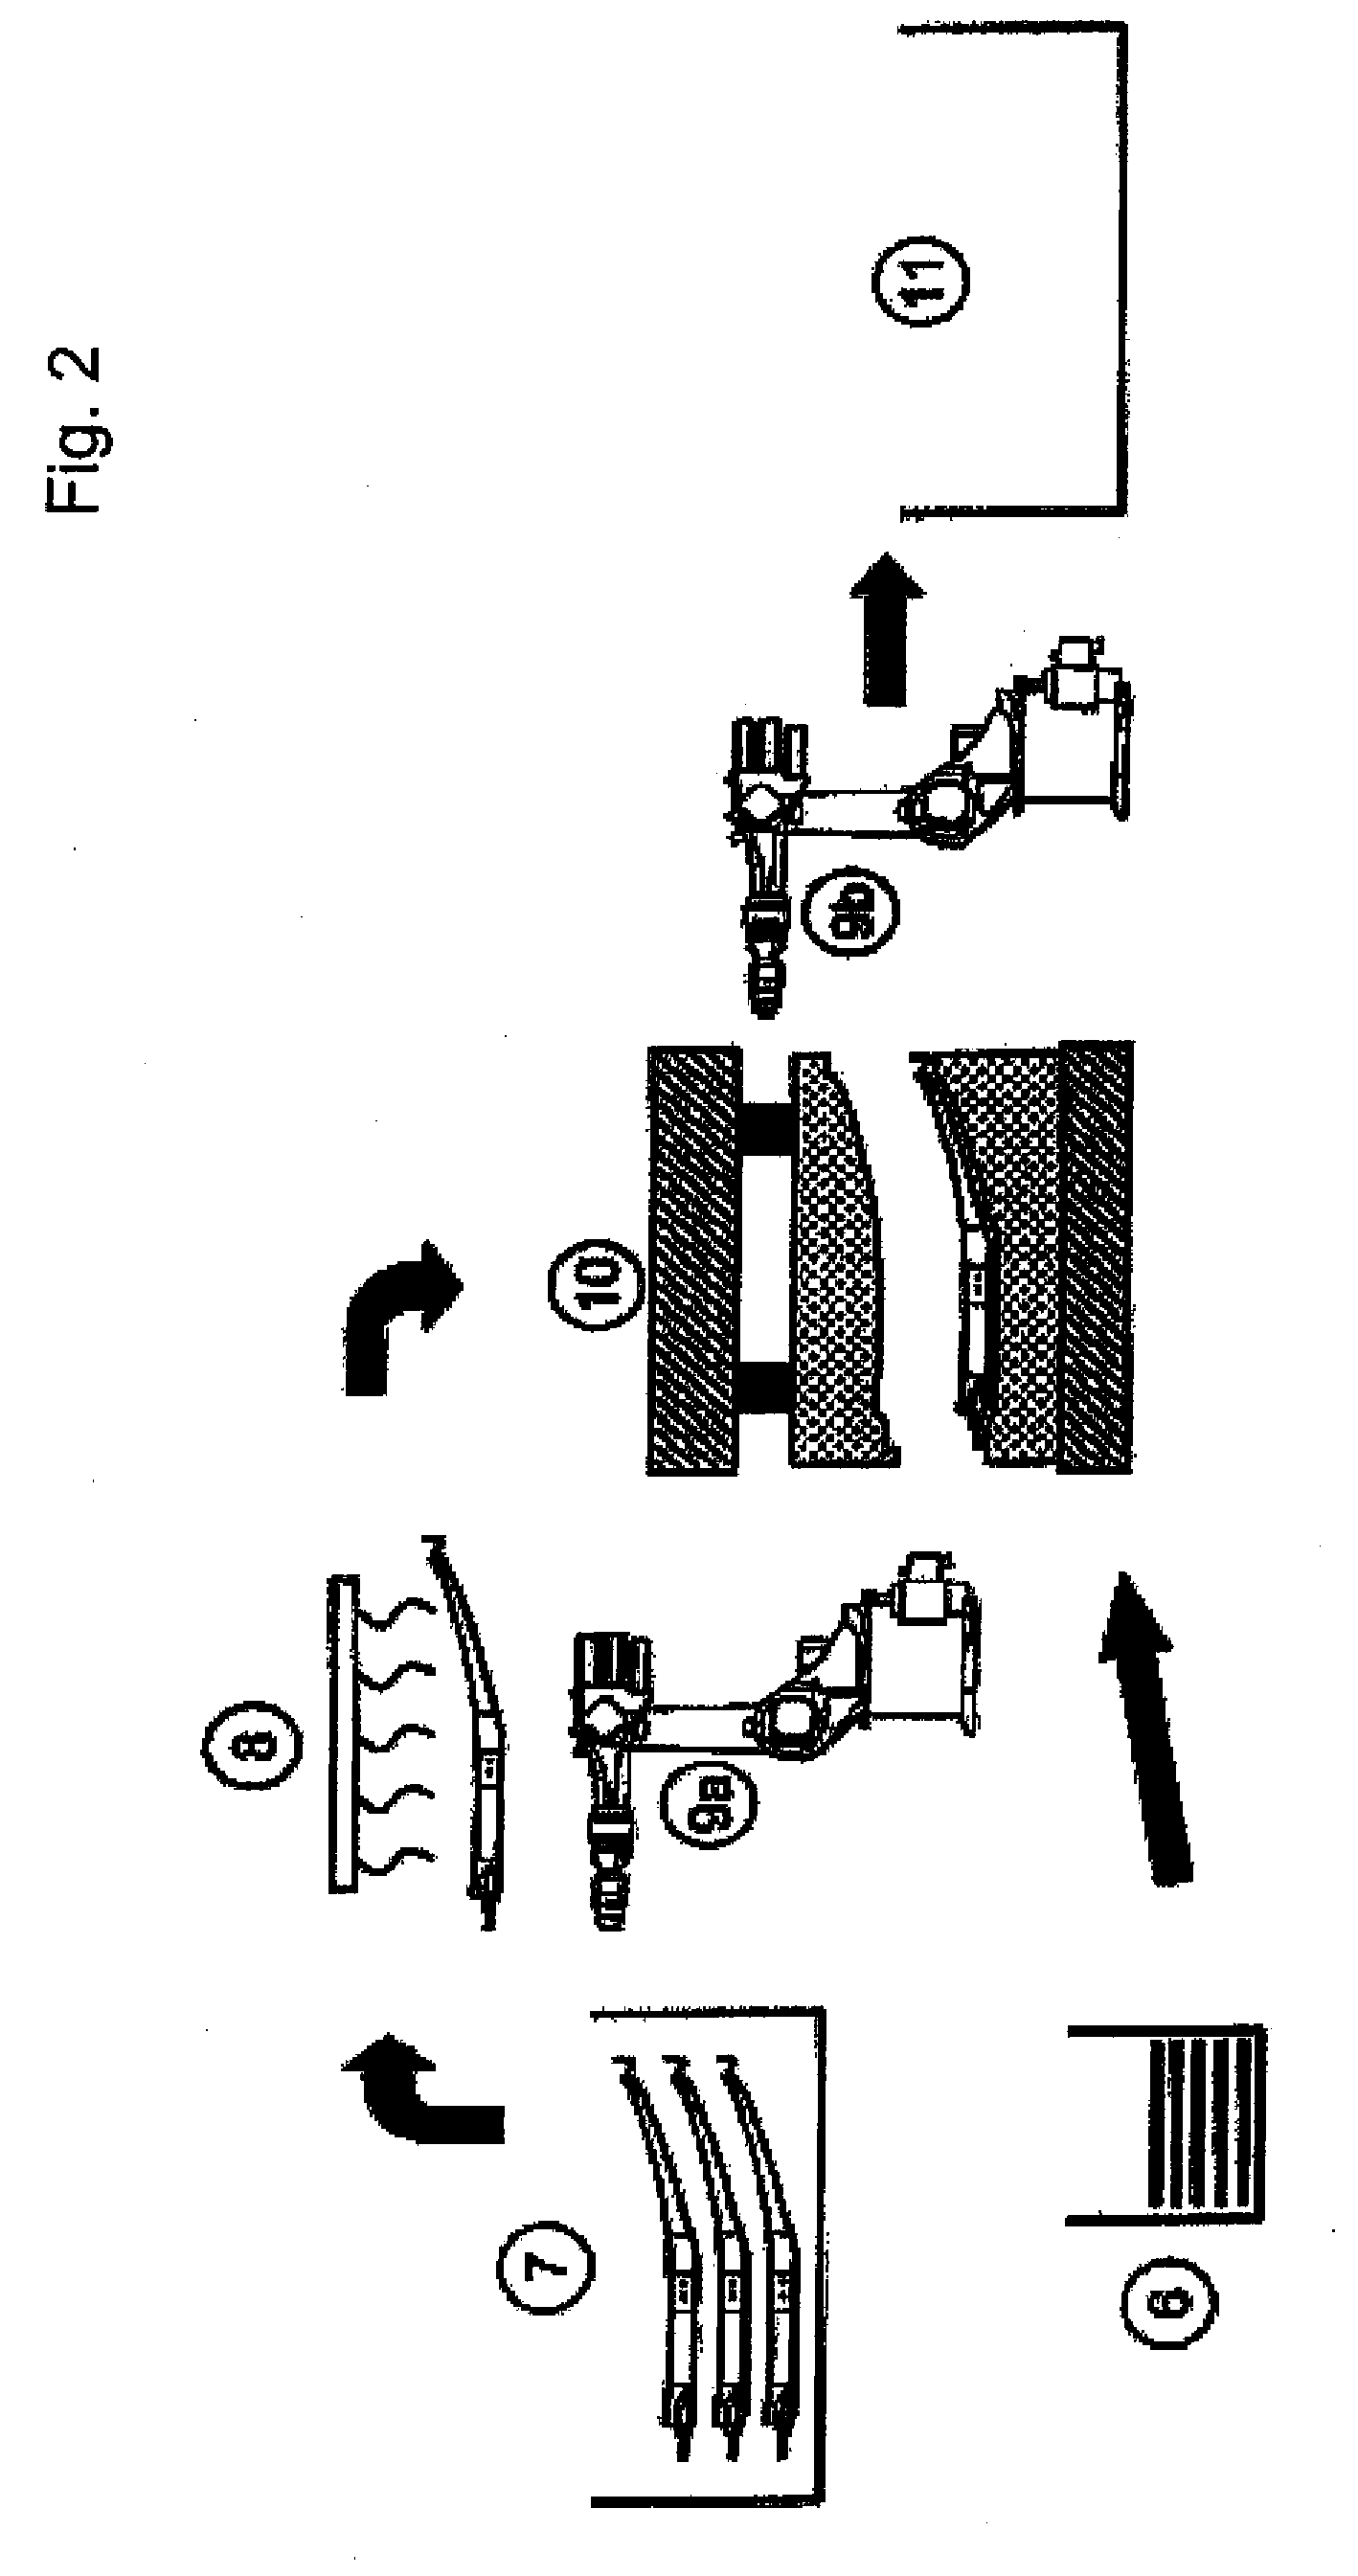 Method of making lightweight structures